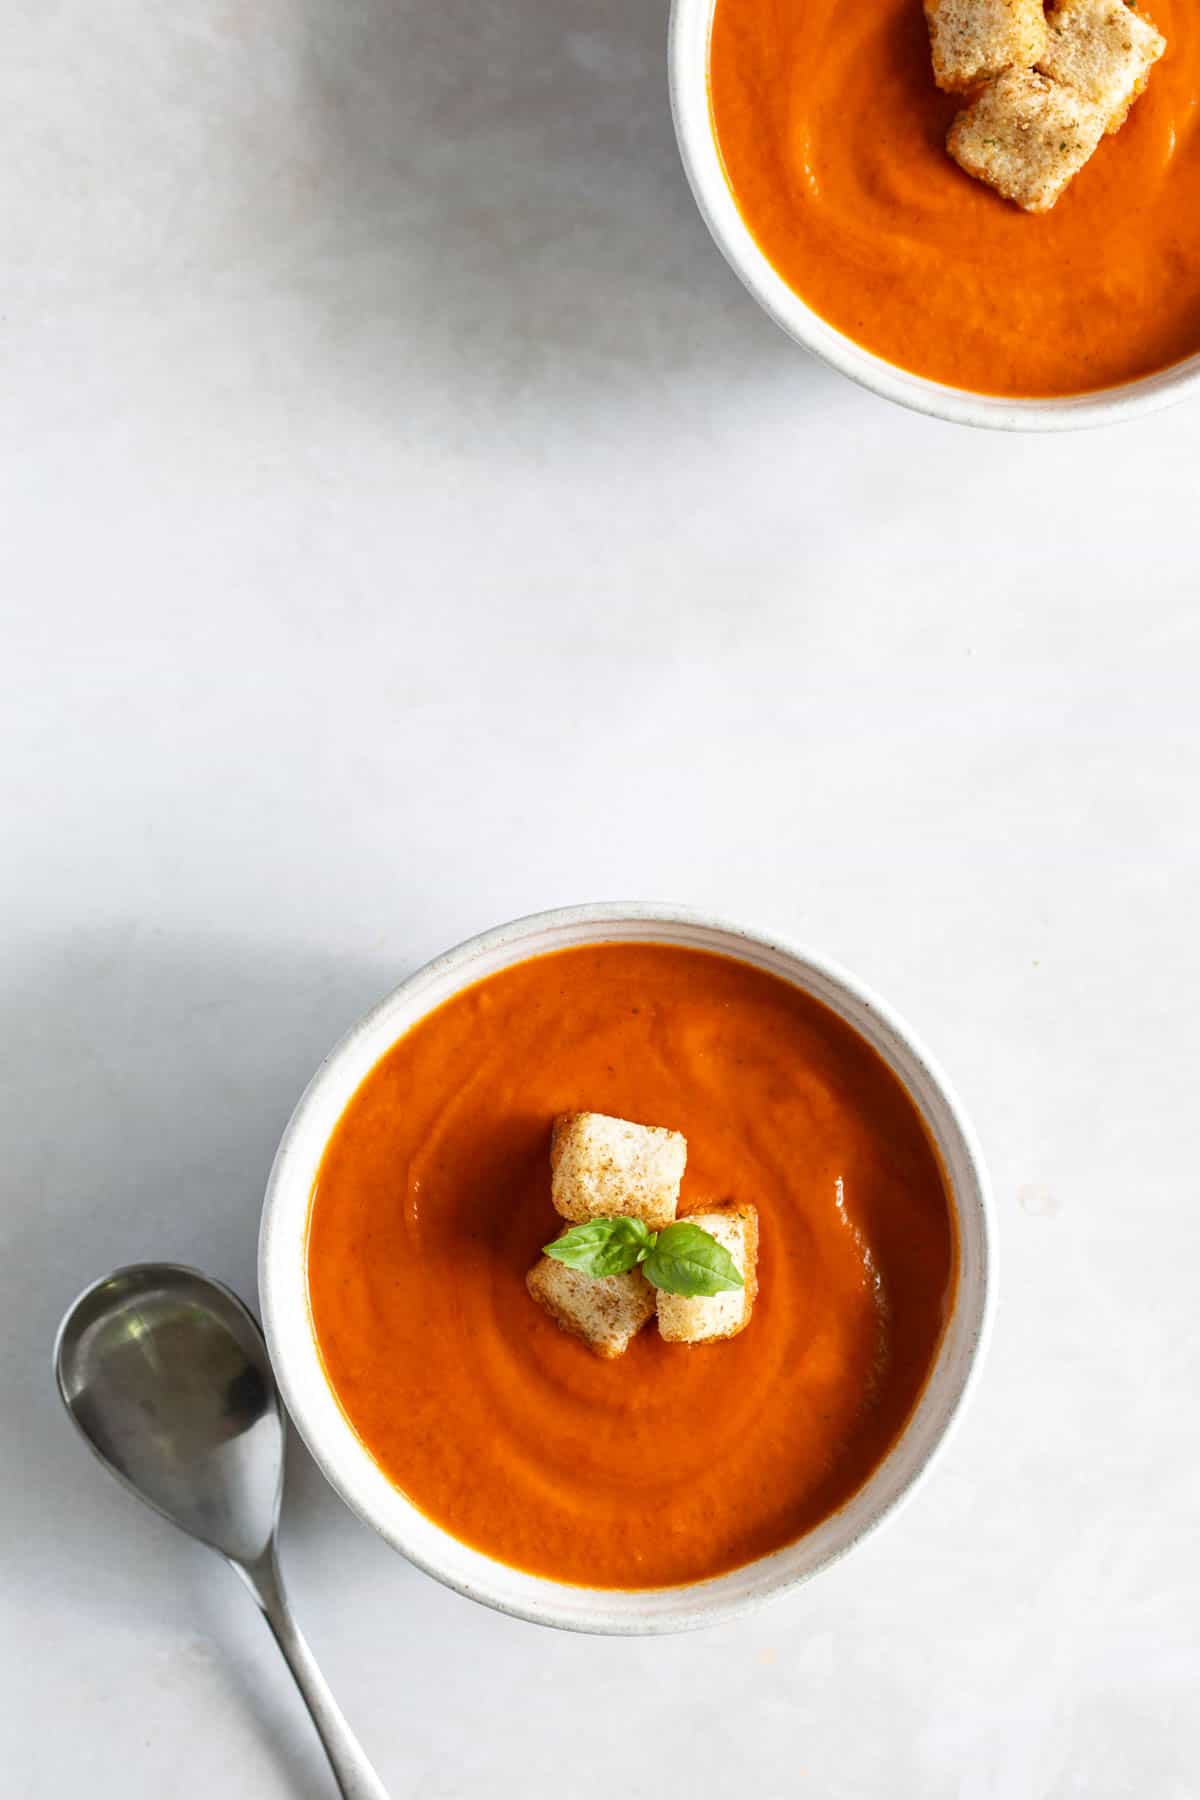 Two bowls of tomato soup with croutons and basil garnish, accompanied by a spoon on a light-colored surface.